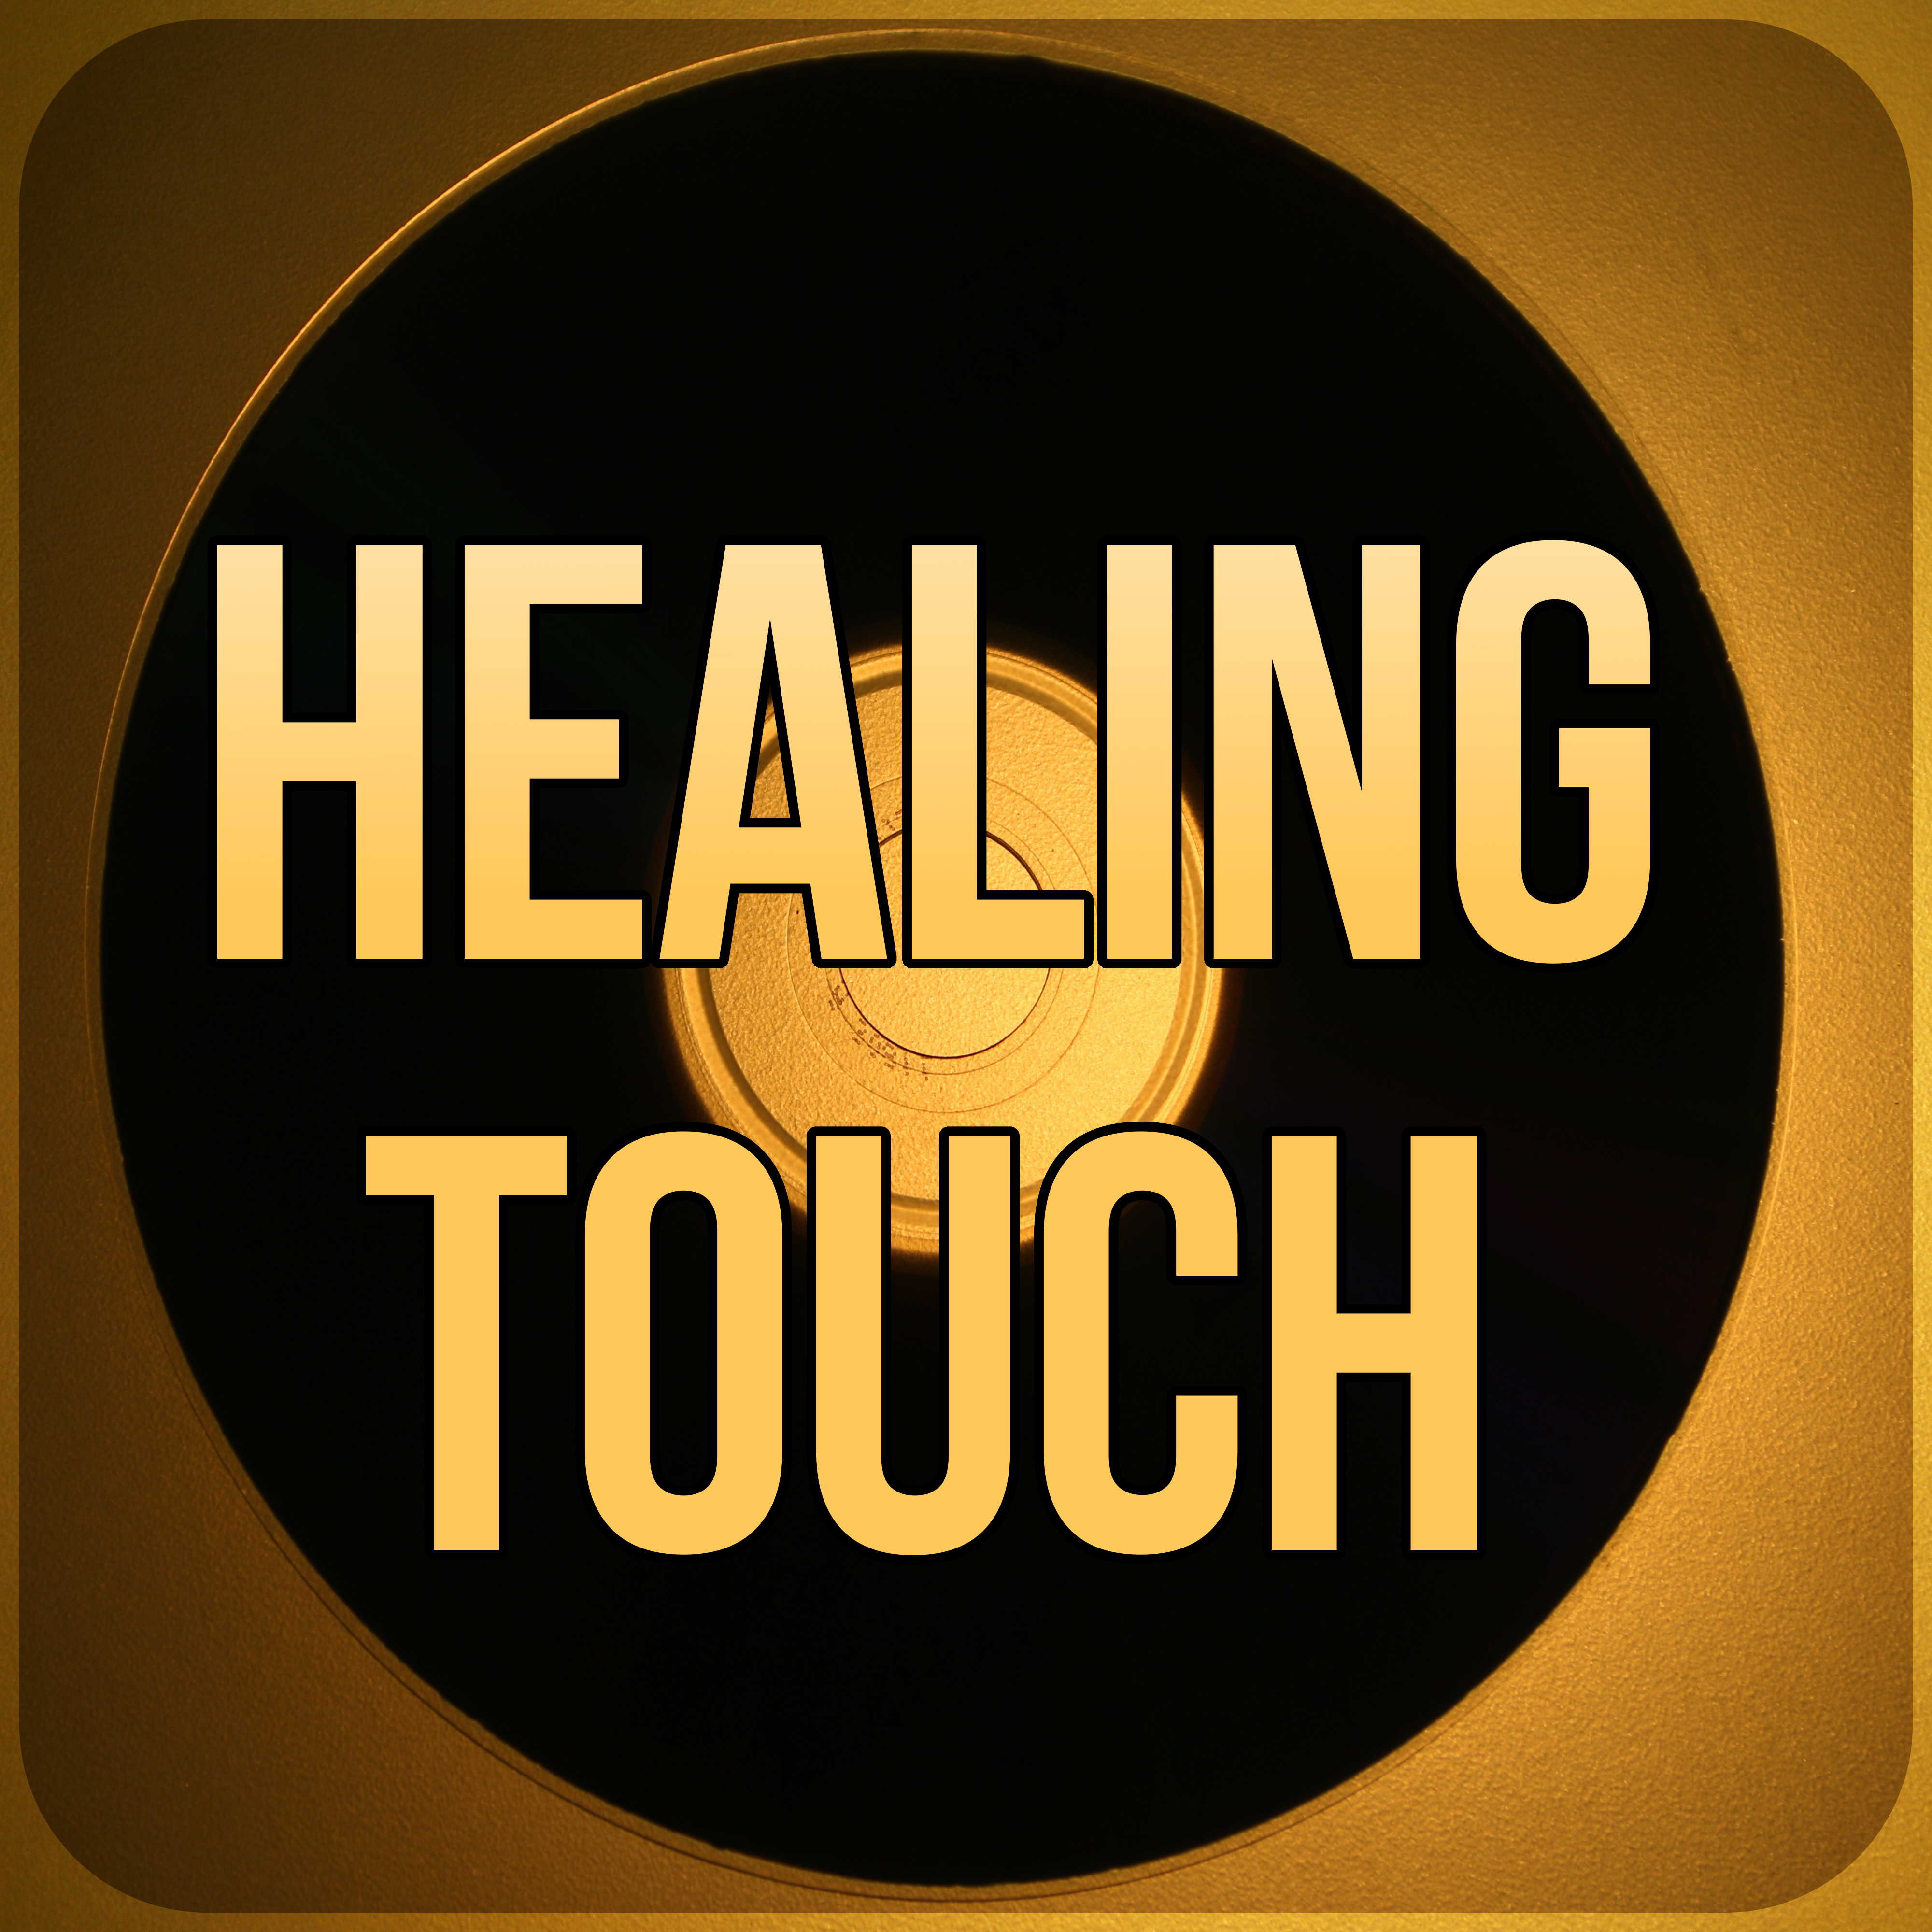 Healing Touch - Calming Music, Mindfulness Meditation, Yoga Poses, Spiritual Healing, Relaxing Music, Massage Therapy, Chill Out Music, Serenity Spa